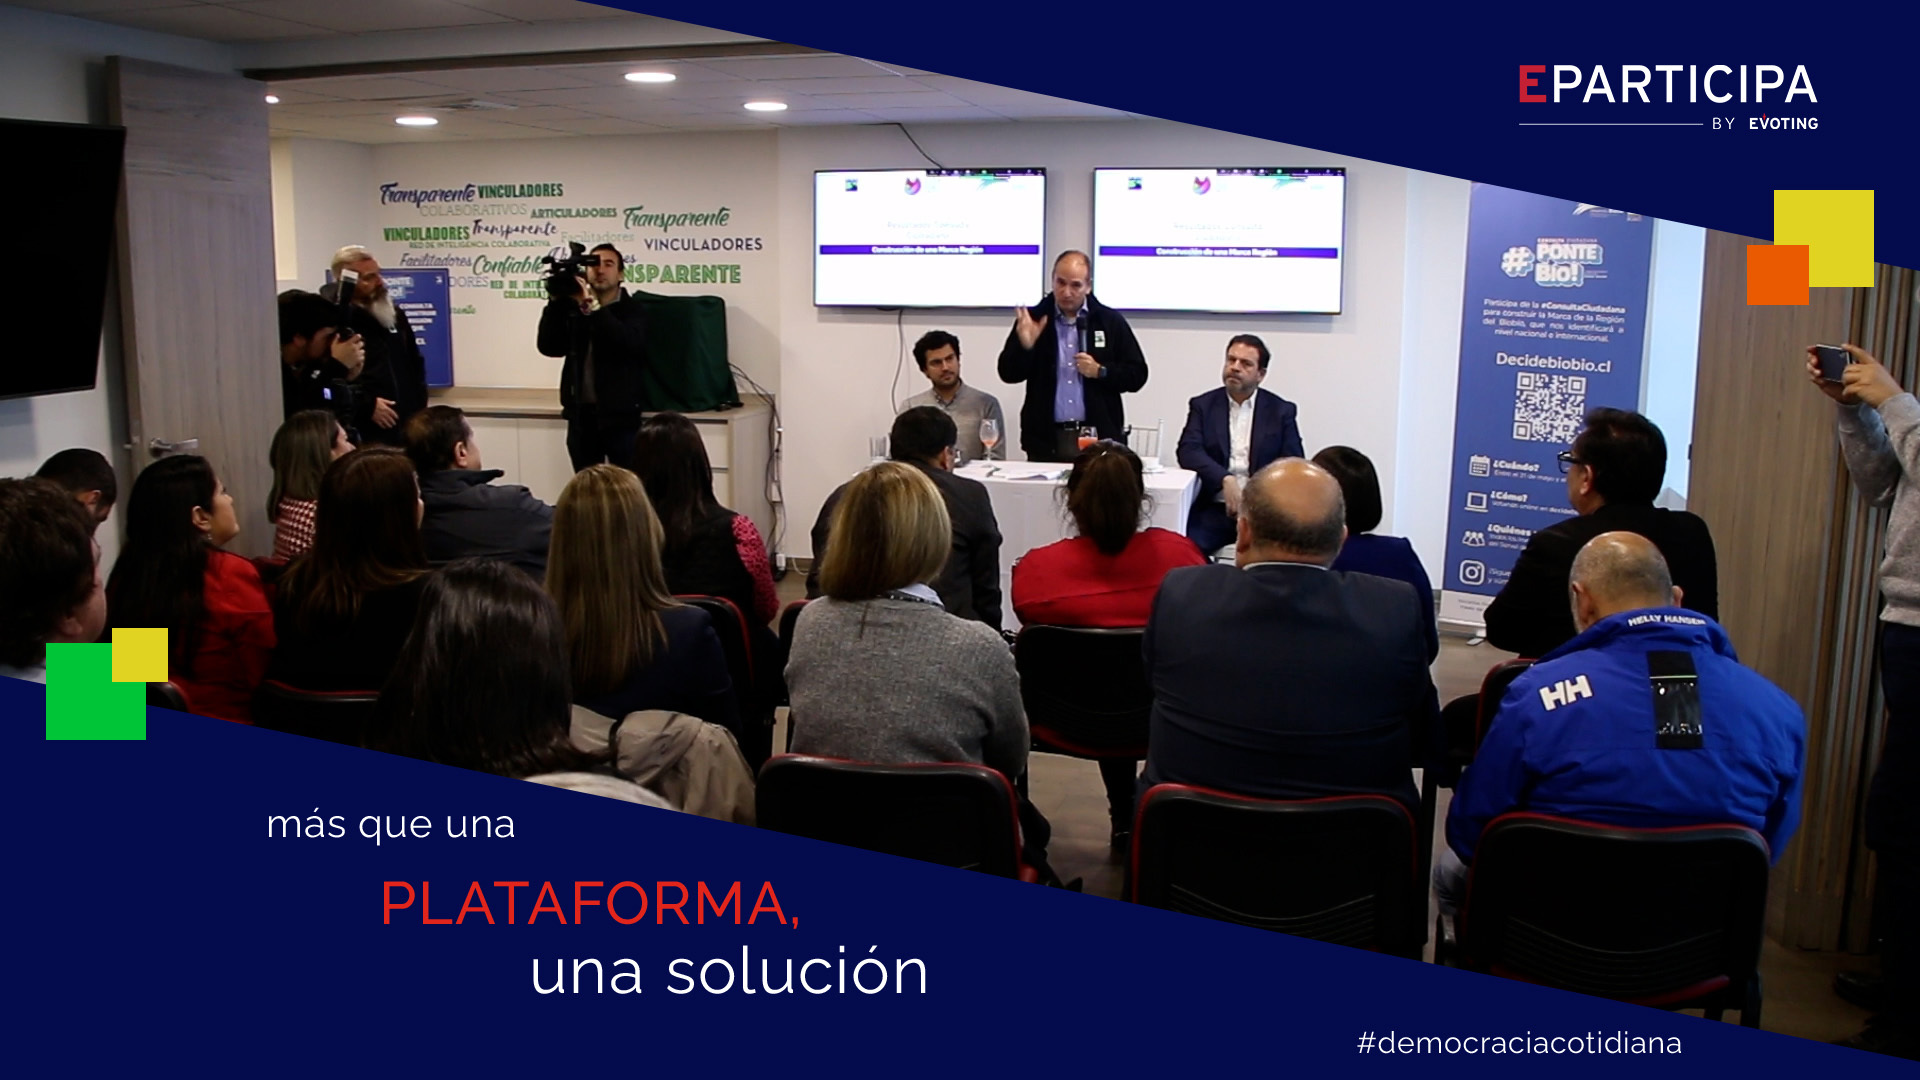 “Consulting the citizens is very important and EVoting assures us an open, safe and serious consultation“. Rodrigo Díaz, Governor of the Biobío Region (Chile), highlighted the process carried out with the EParticipation platform.“